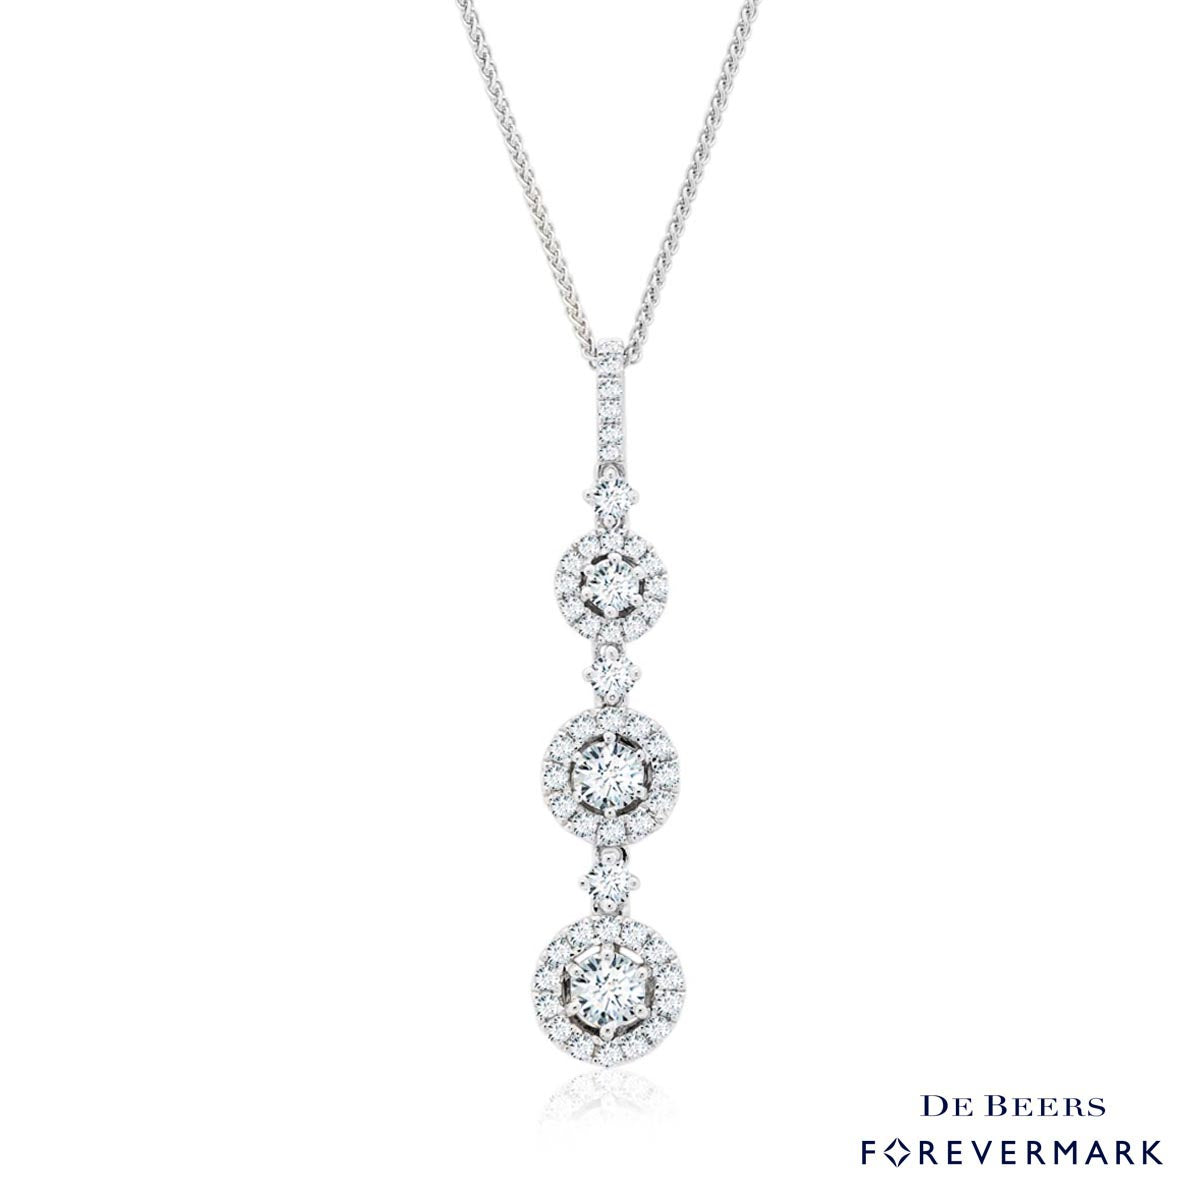 De Beers Forevermark Center of My Universe Three Stone Diamond Necklace in 18kt White Gold (5/8ct tw)